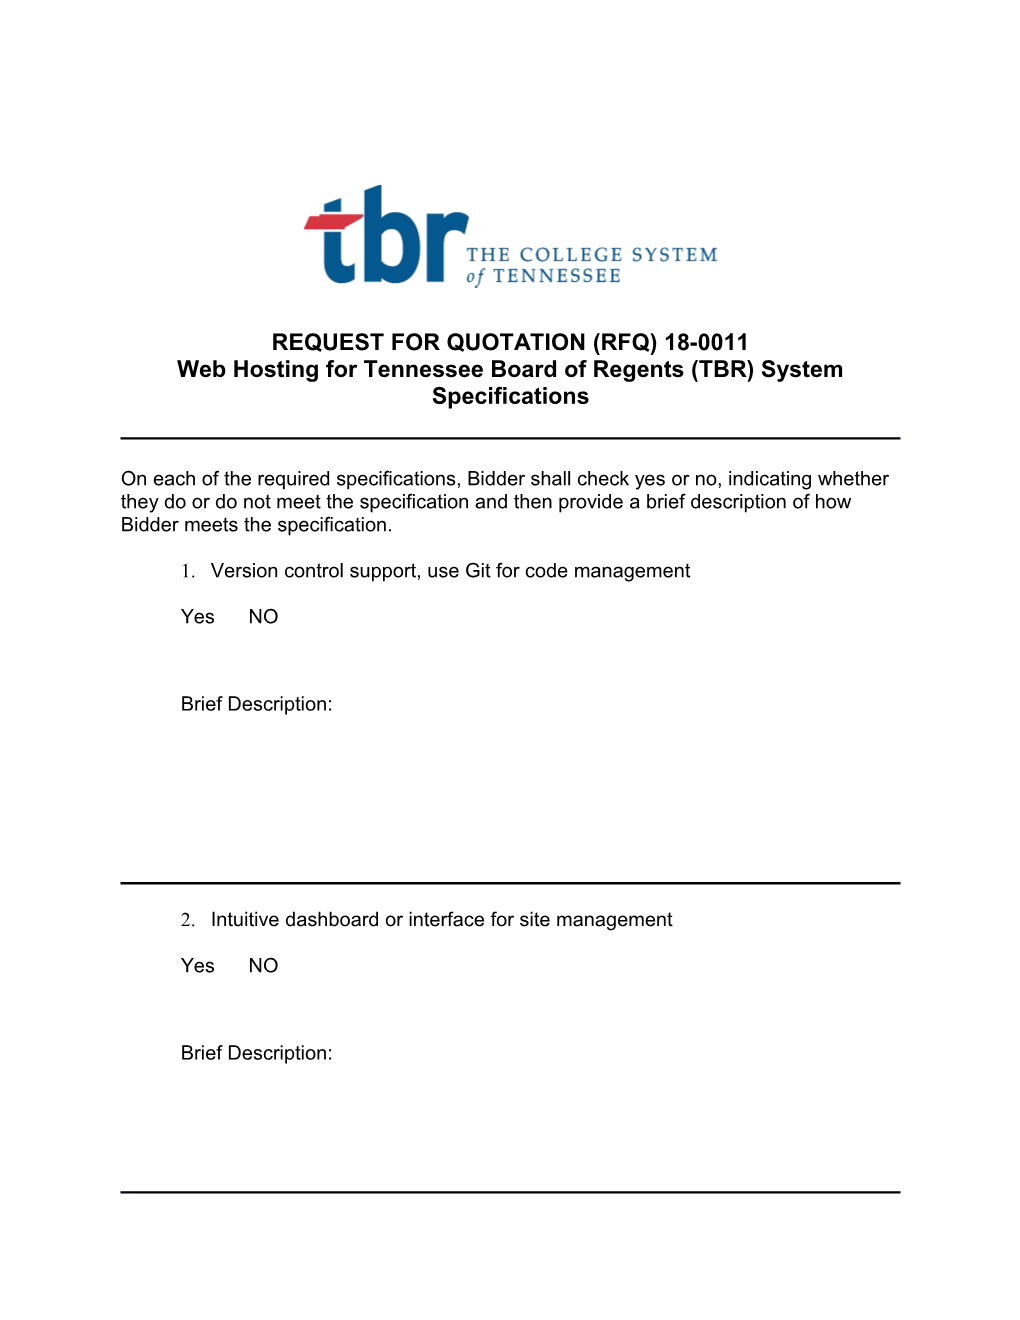 Web Hosting for Tennessee Board of Regents (TBR) System